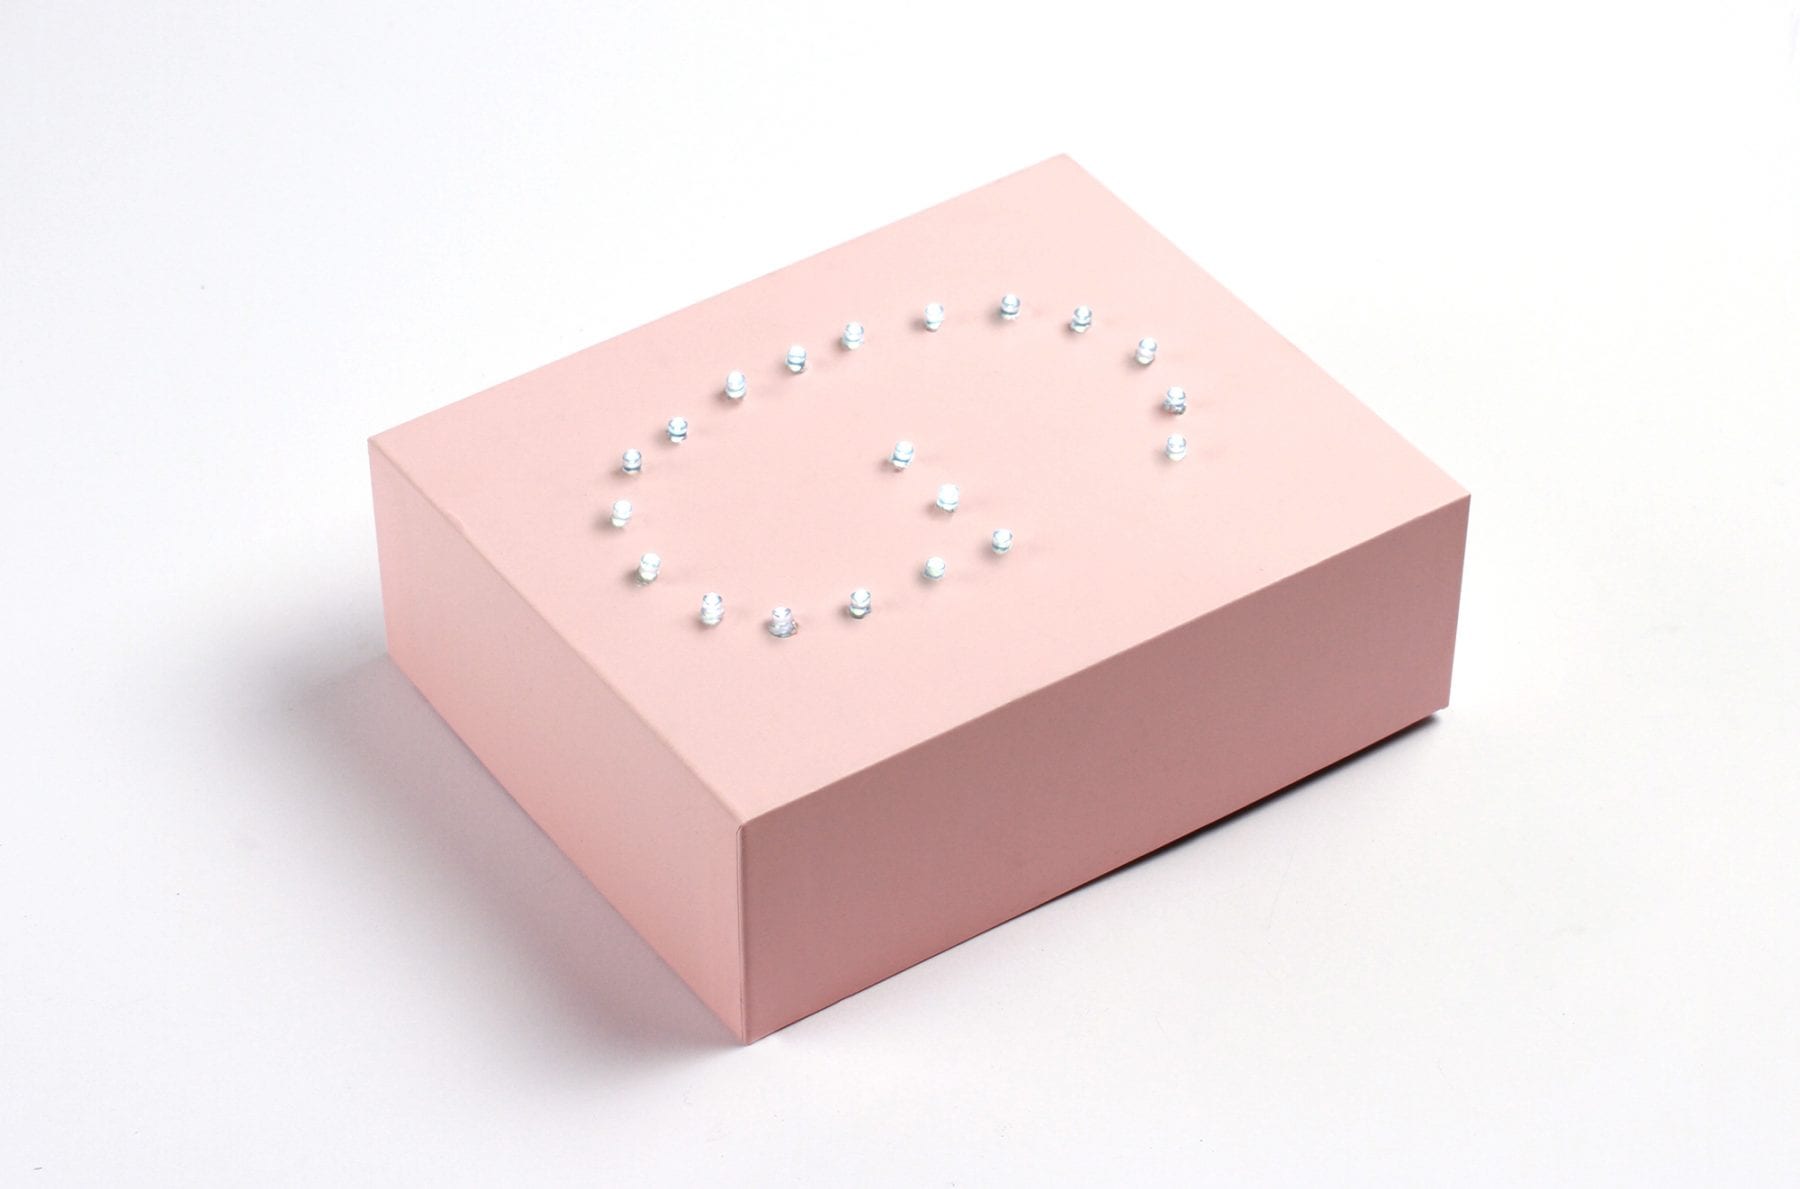 Upscale_Glossybox_letter_light_Step_3